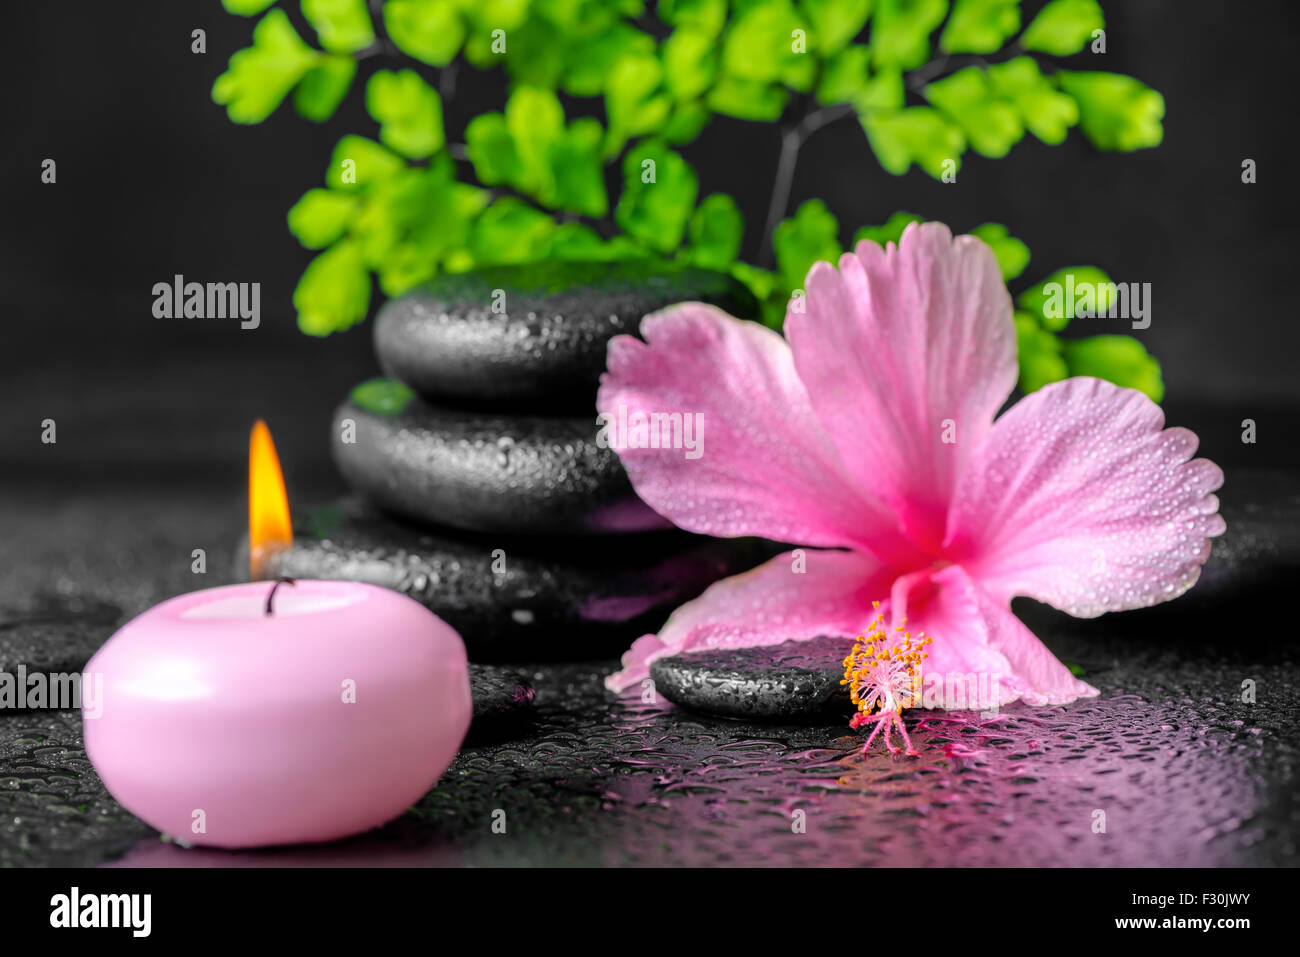 beautiful spa concept of pink hibiscus flower, fern branch, candle and stones pyramid with drops, closeup Stock Photo